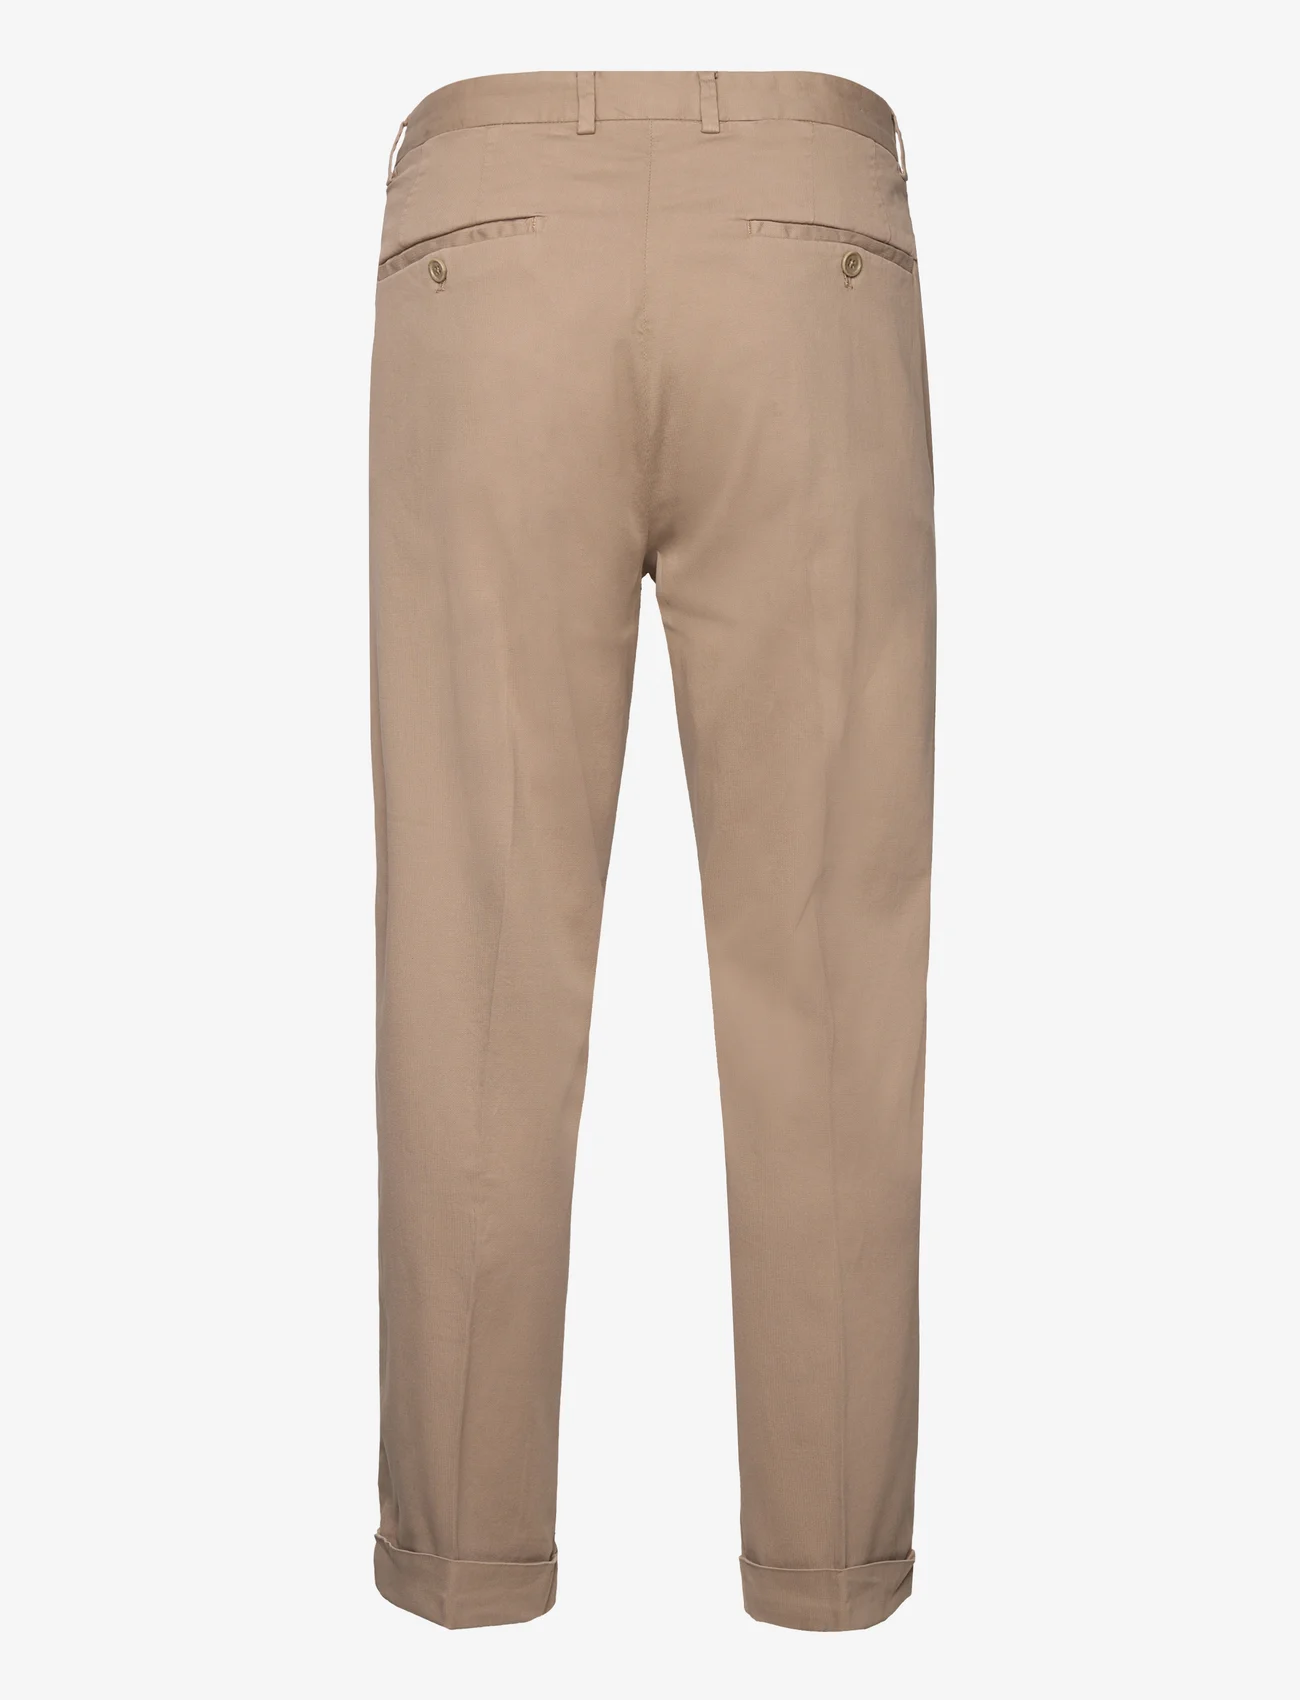 GANT - RELAXED TAPERED COTTON SUIT PANTS - chino's - taupe beige - 1